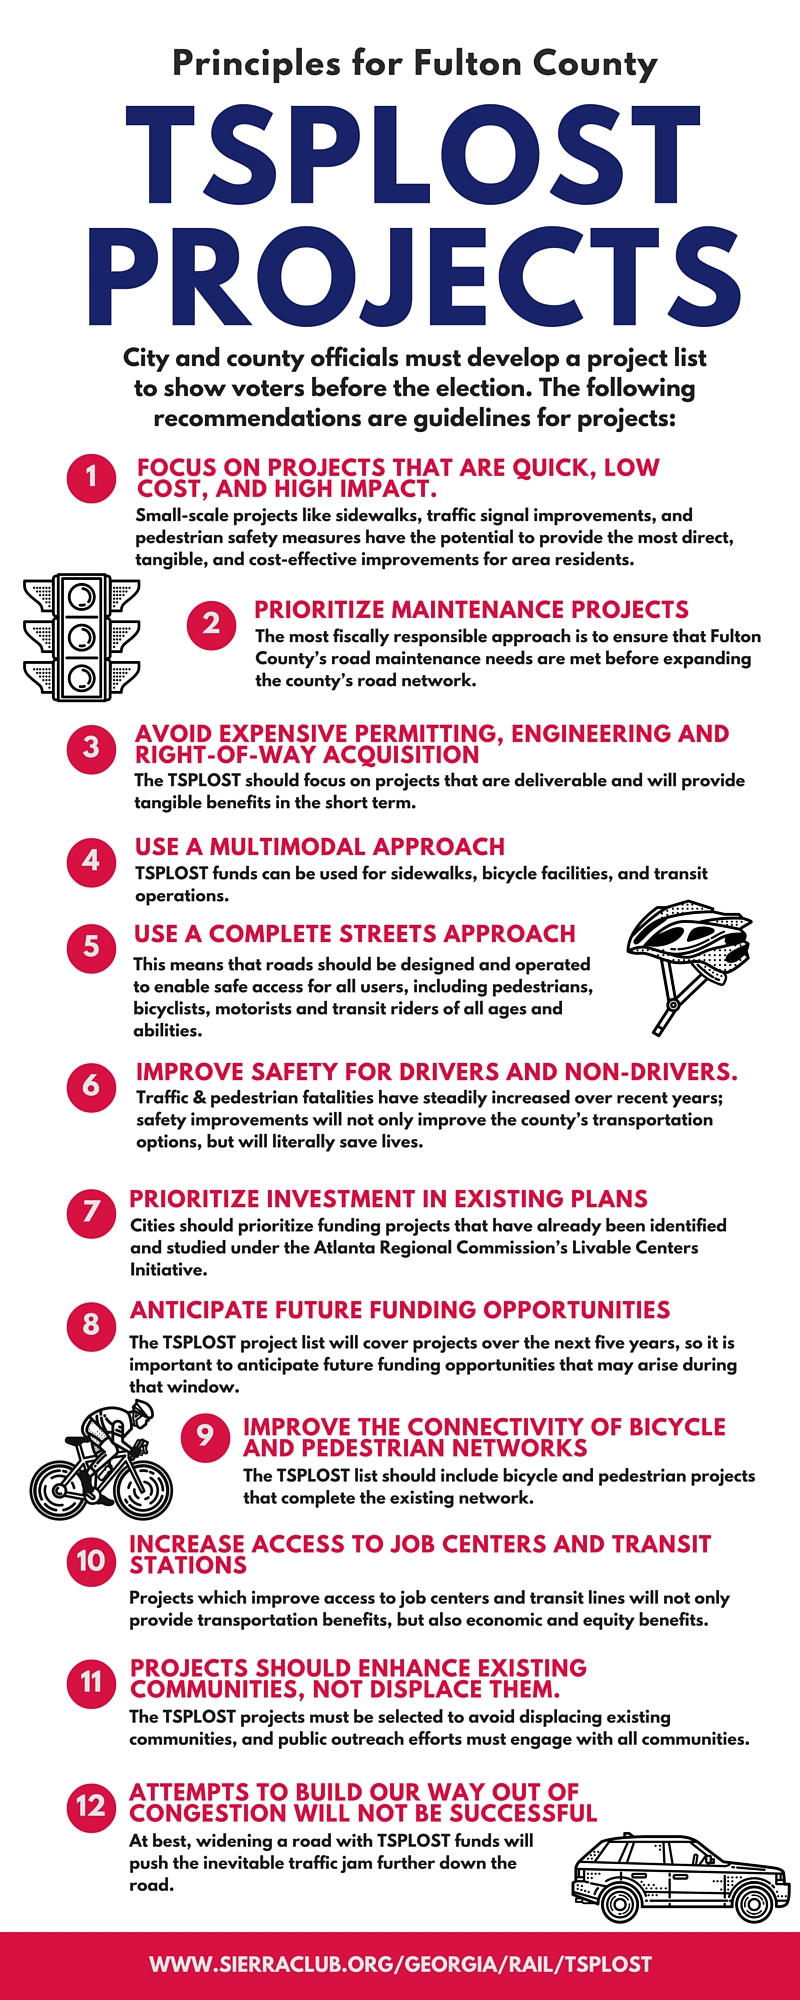 Principles for Fulton County TSPLOST Projects